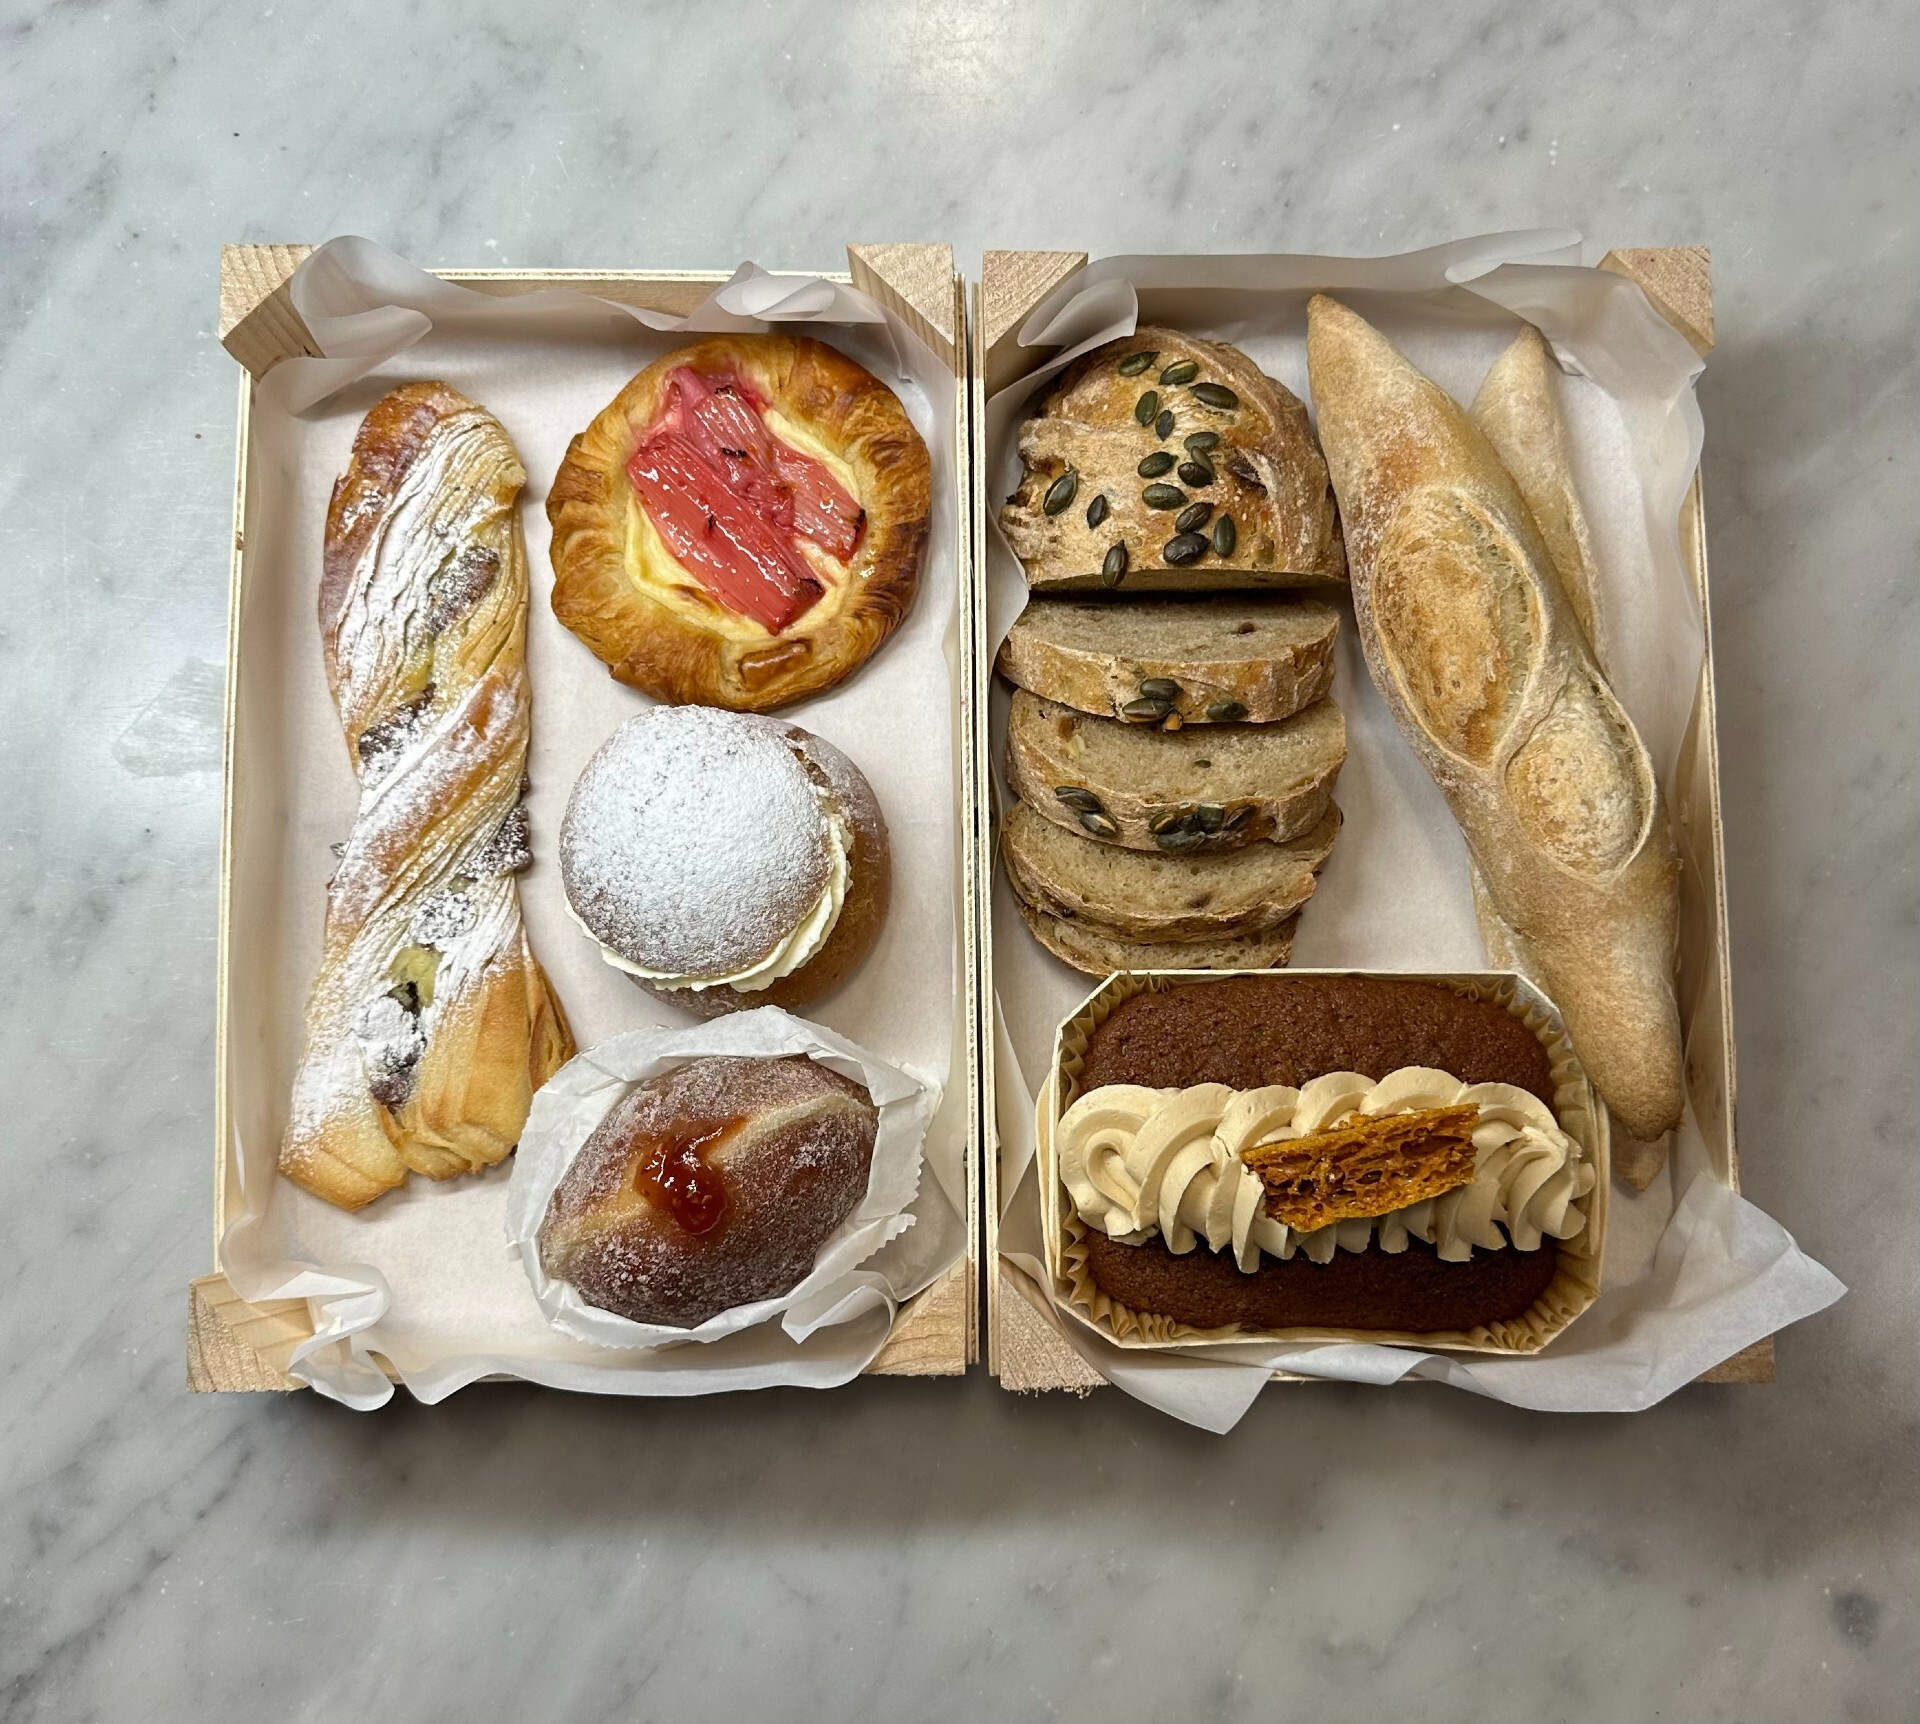 beloved-artisan-bakery-astrid-is-opening-its-first-permanent-shop-in-north-london